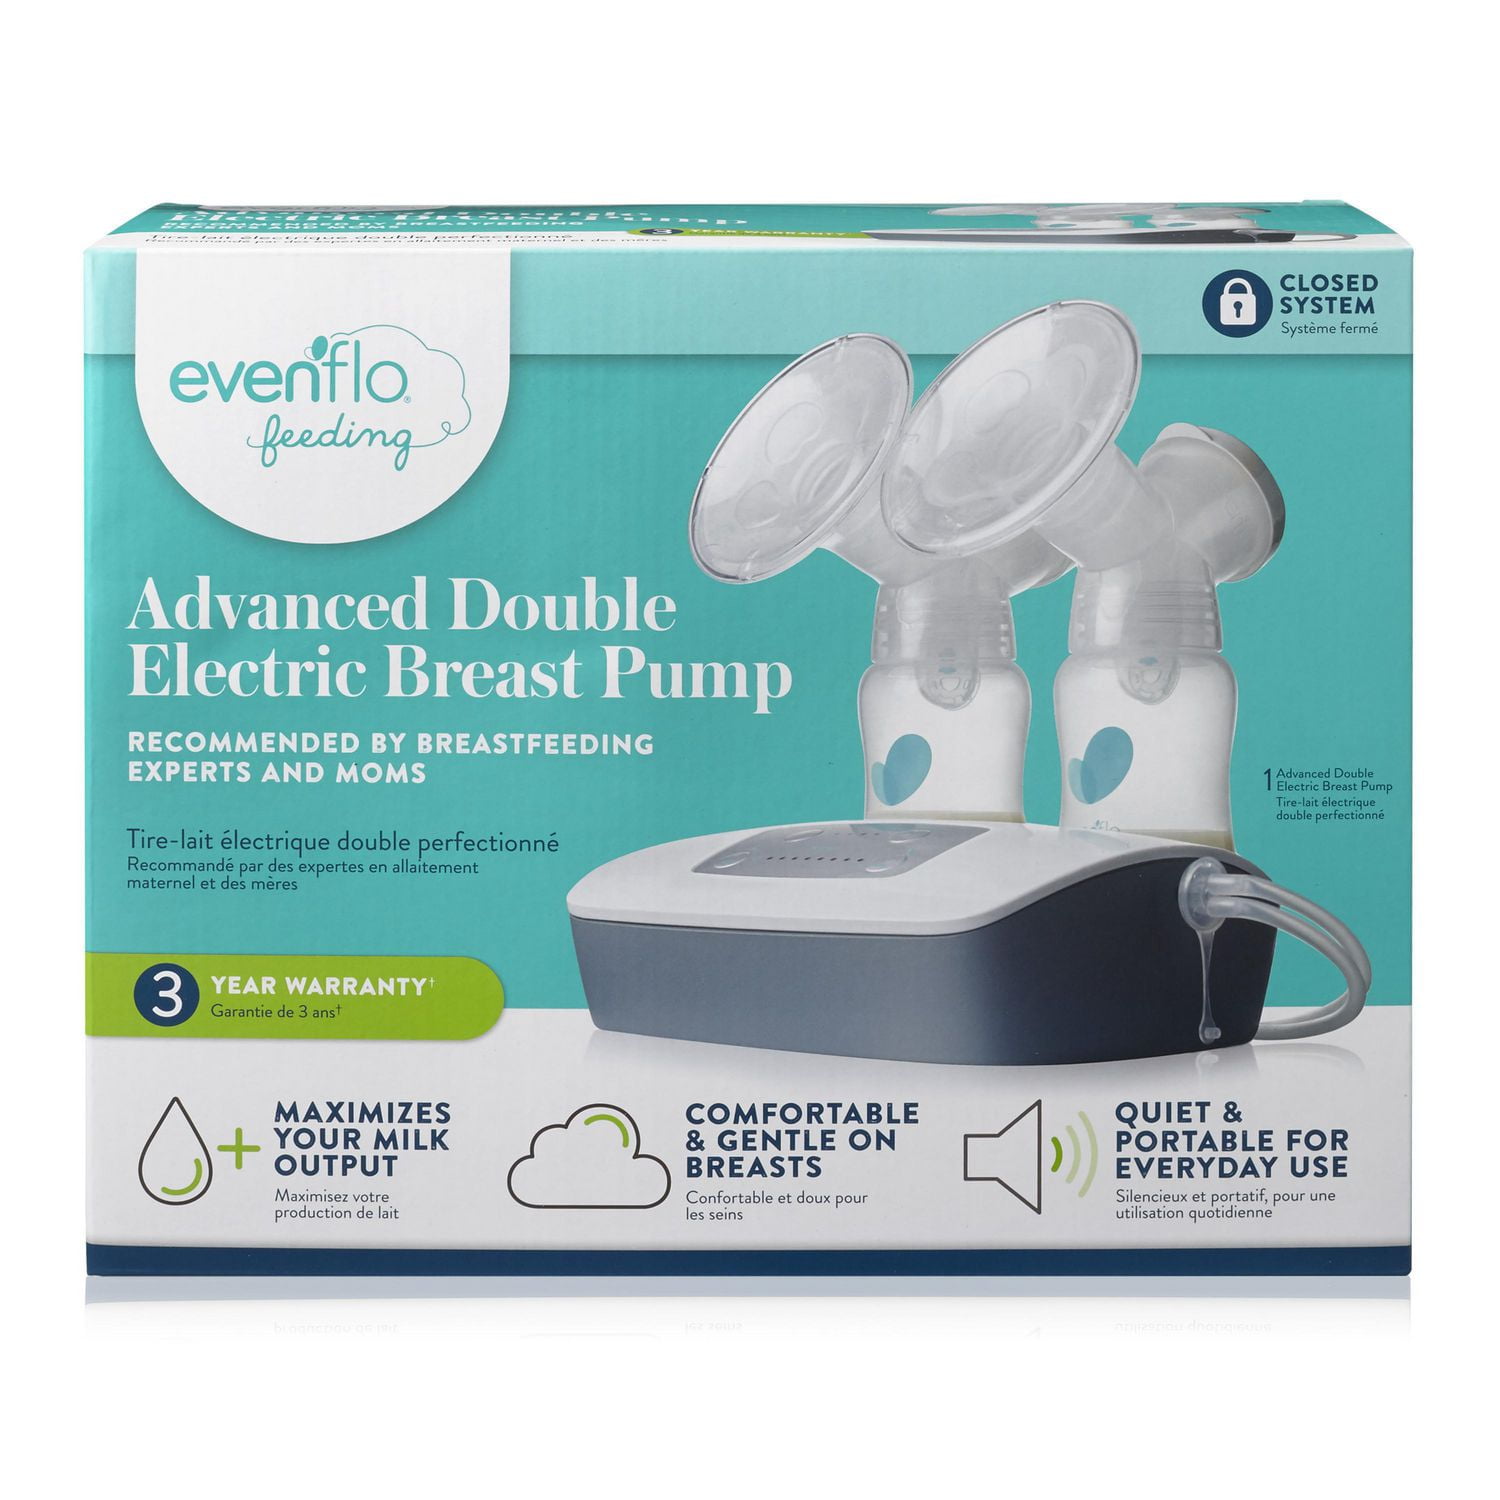 Double Electric Breast Pump - Recommended by Mums – New Beginnings